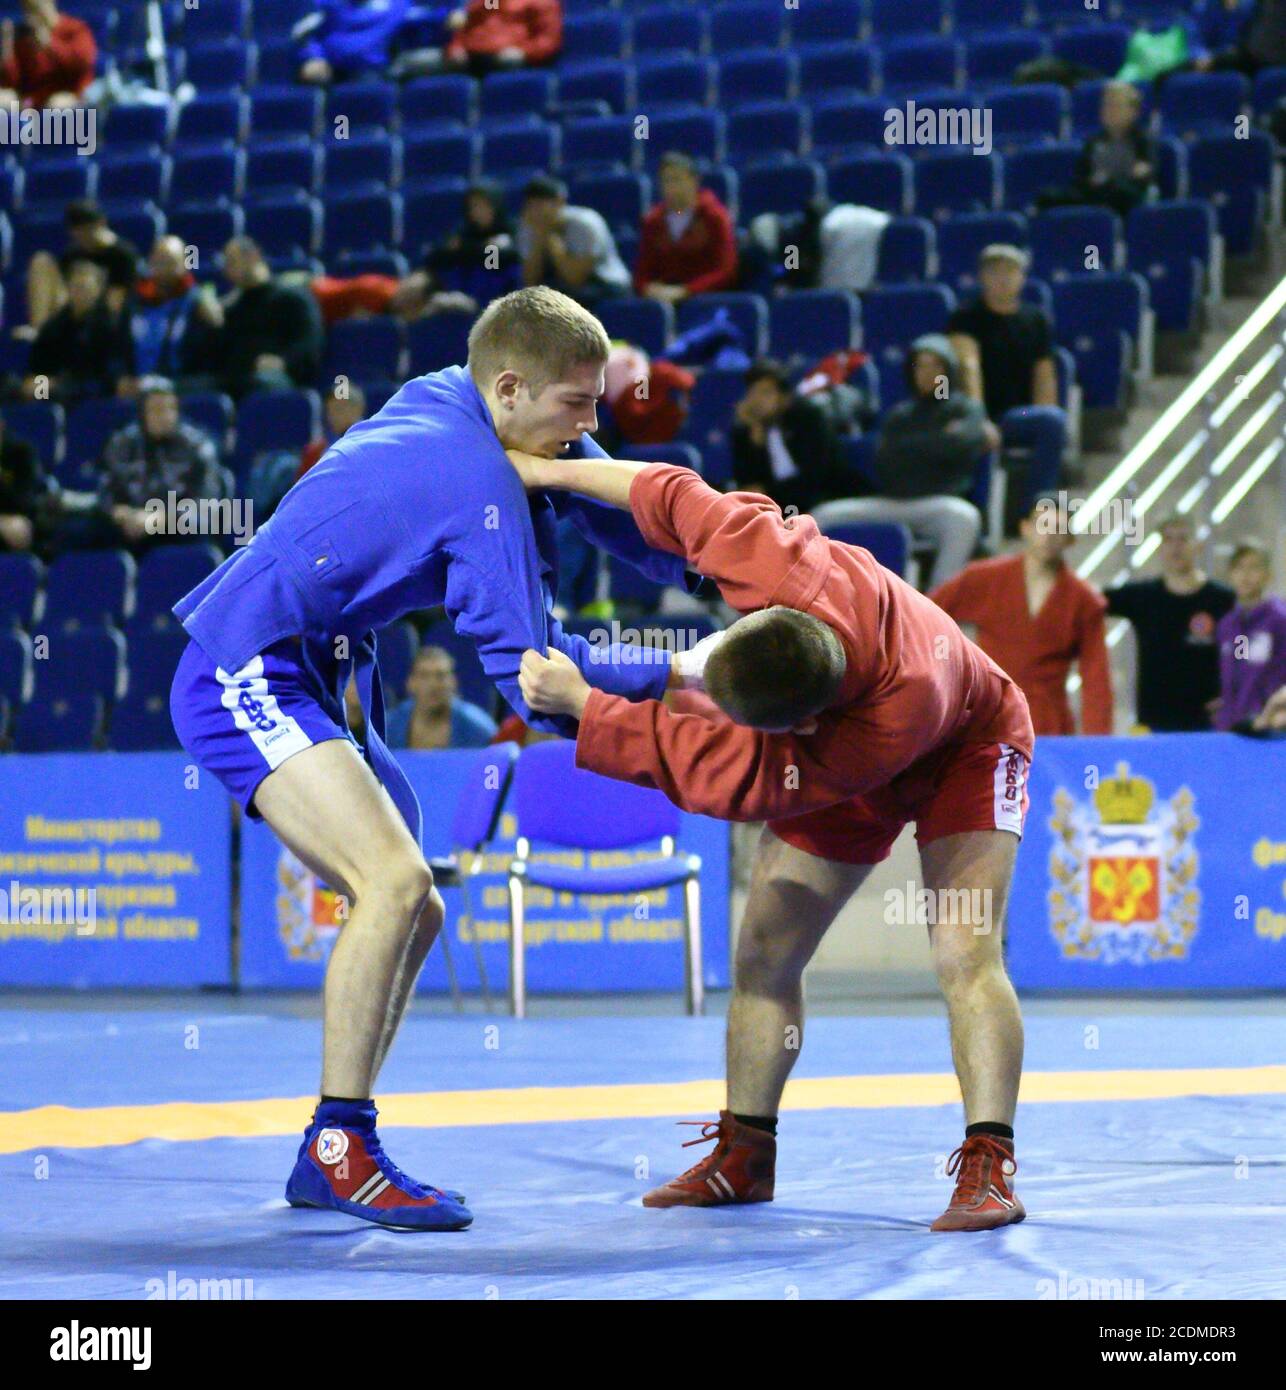 Orenburg, Russia - October 25-26, 2019: Boys competitions Self-defense without weapons in the Championship of the Orenburg region among boys and girls Stock Photo